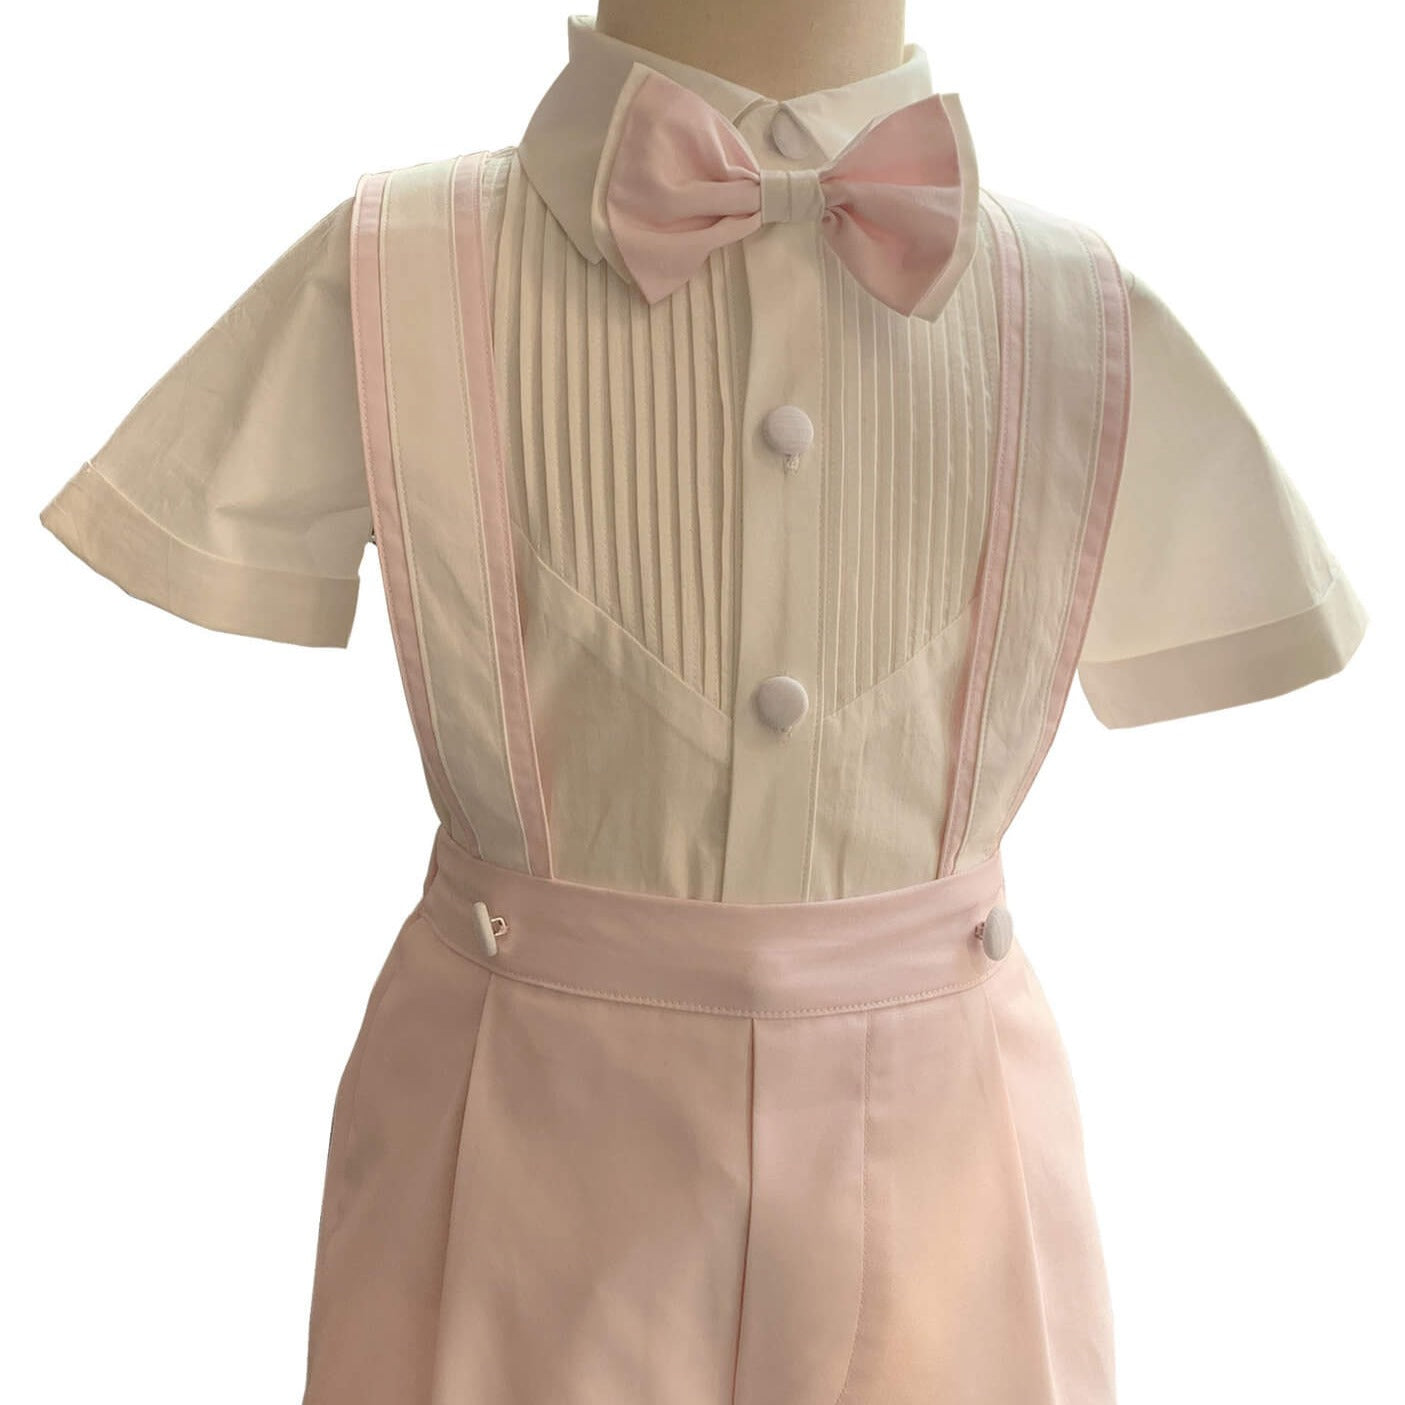 Pink & White Boys Suspender Set With Bow,12M to 5T